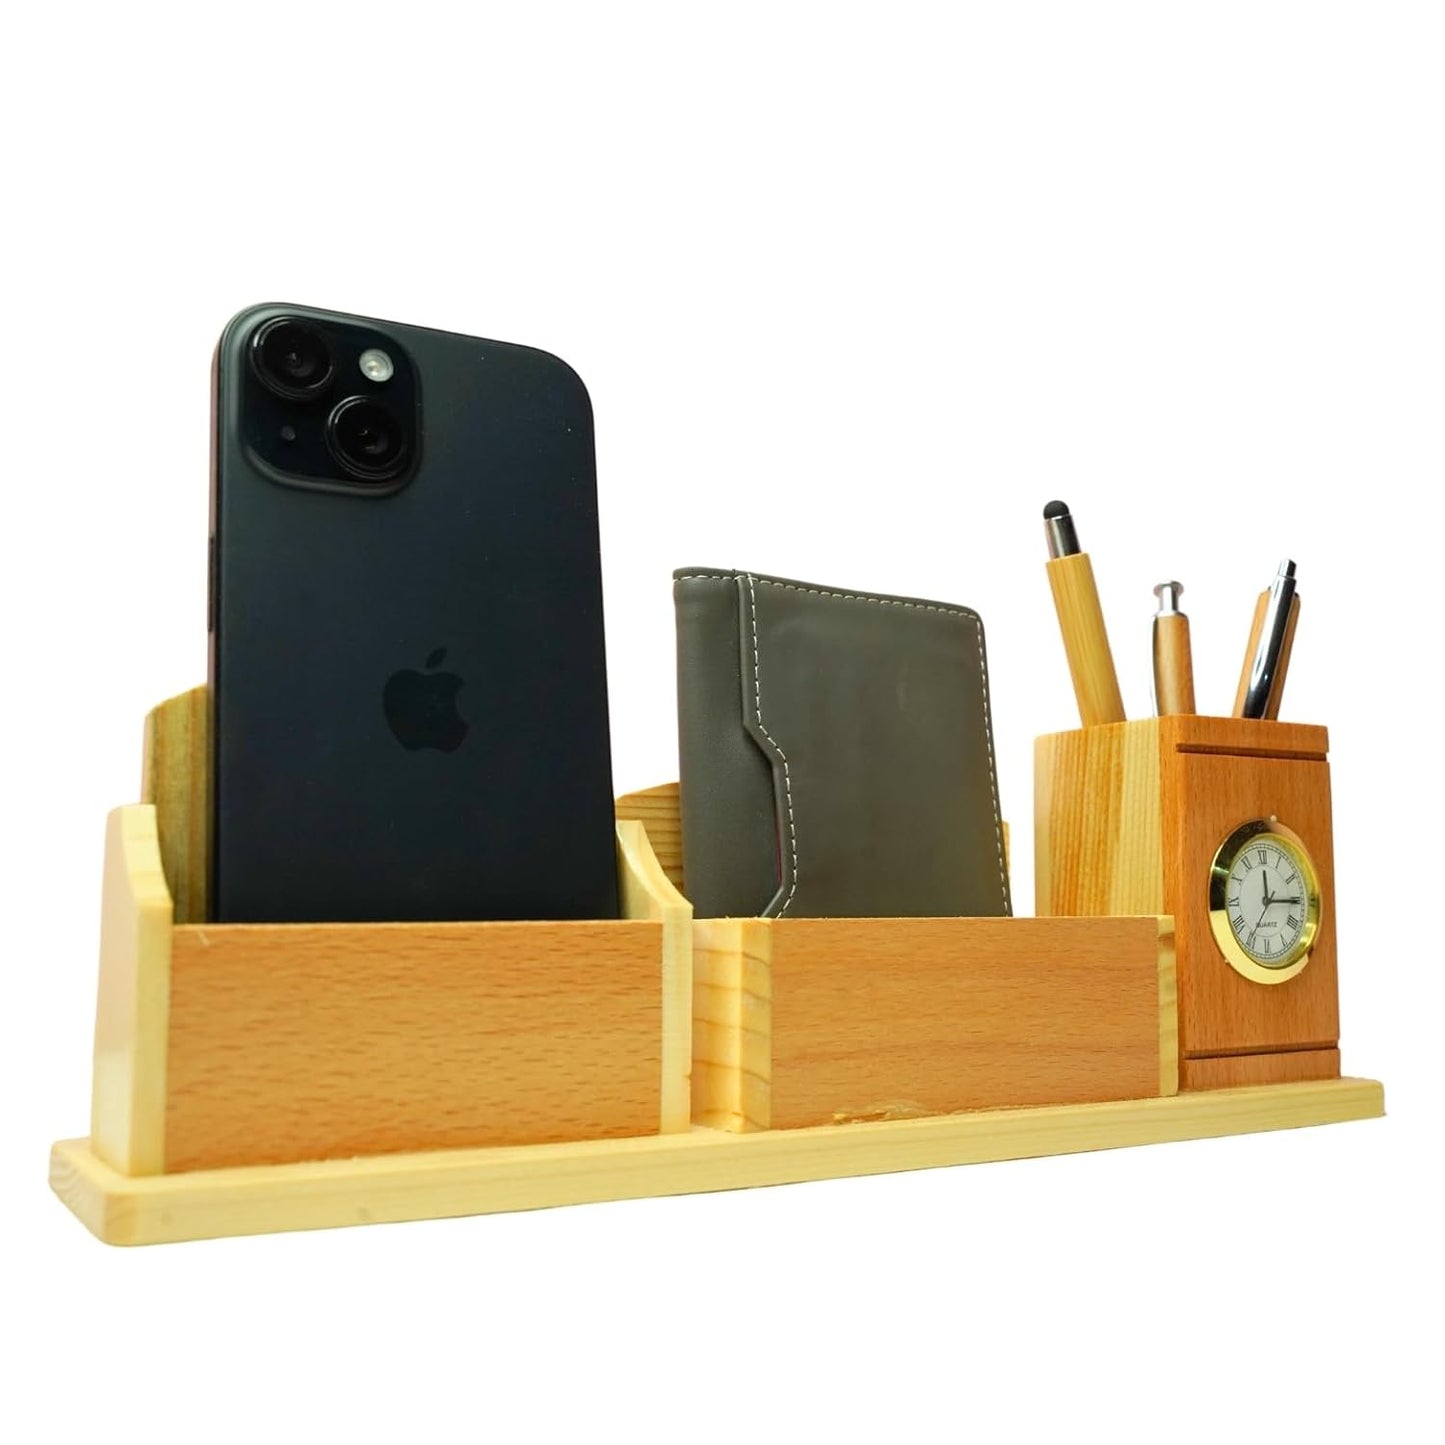 Craft Closet & Gifts - Steam Beech Wooden Desk Supplies Organizer with Clock, Wallet/Card Holder, Pen/Pencil Stand & Mobile Stand For IAS, Advocates, Office & Corporate Gifts